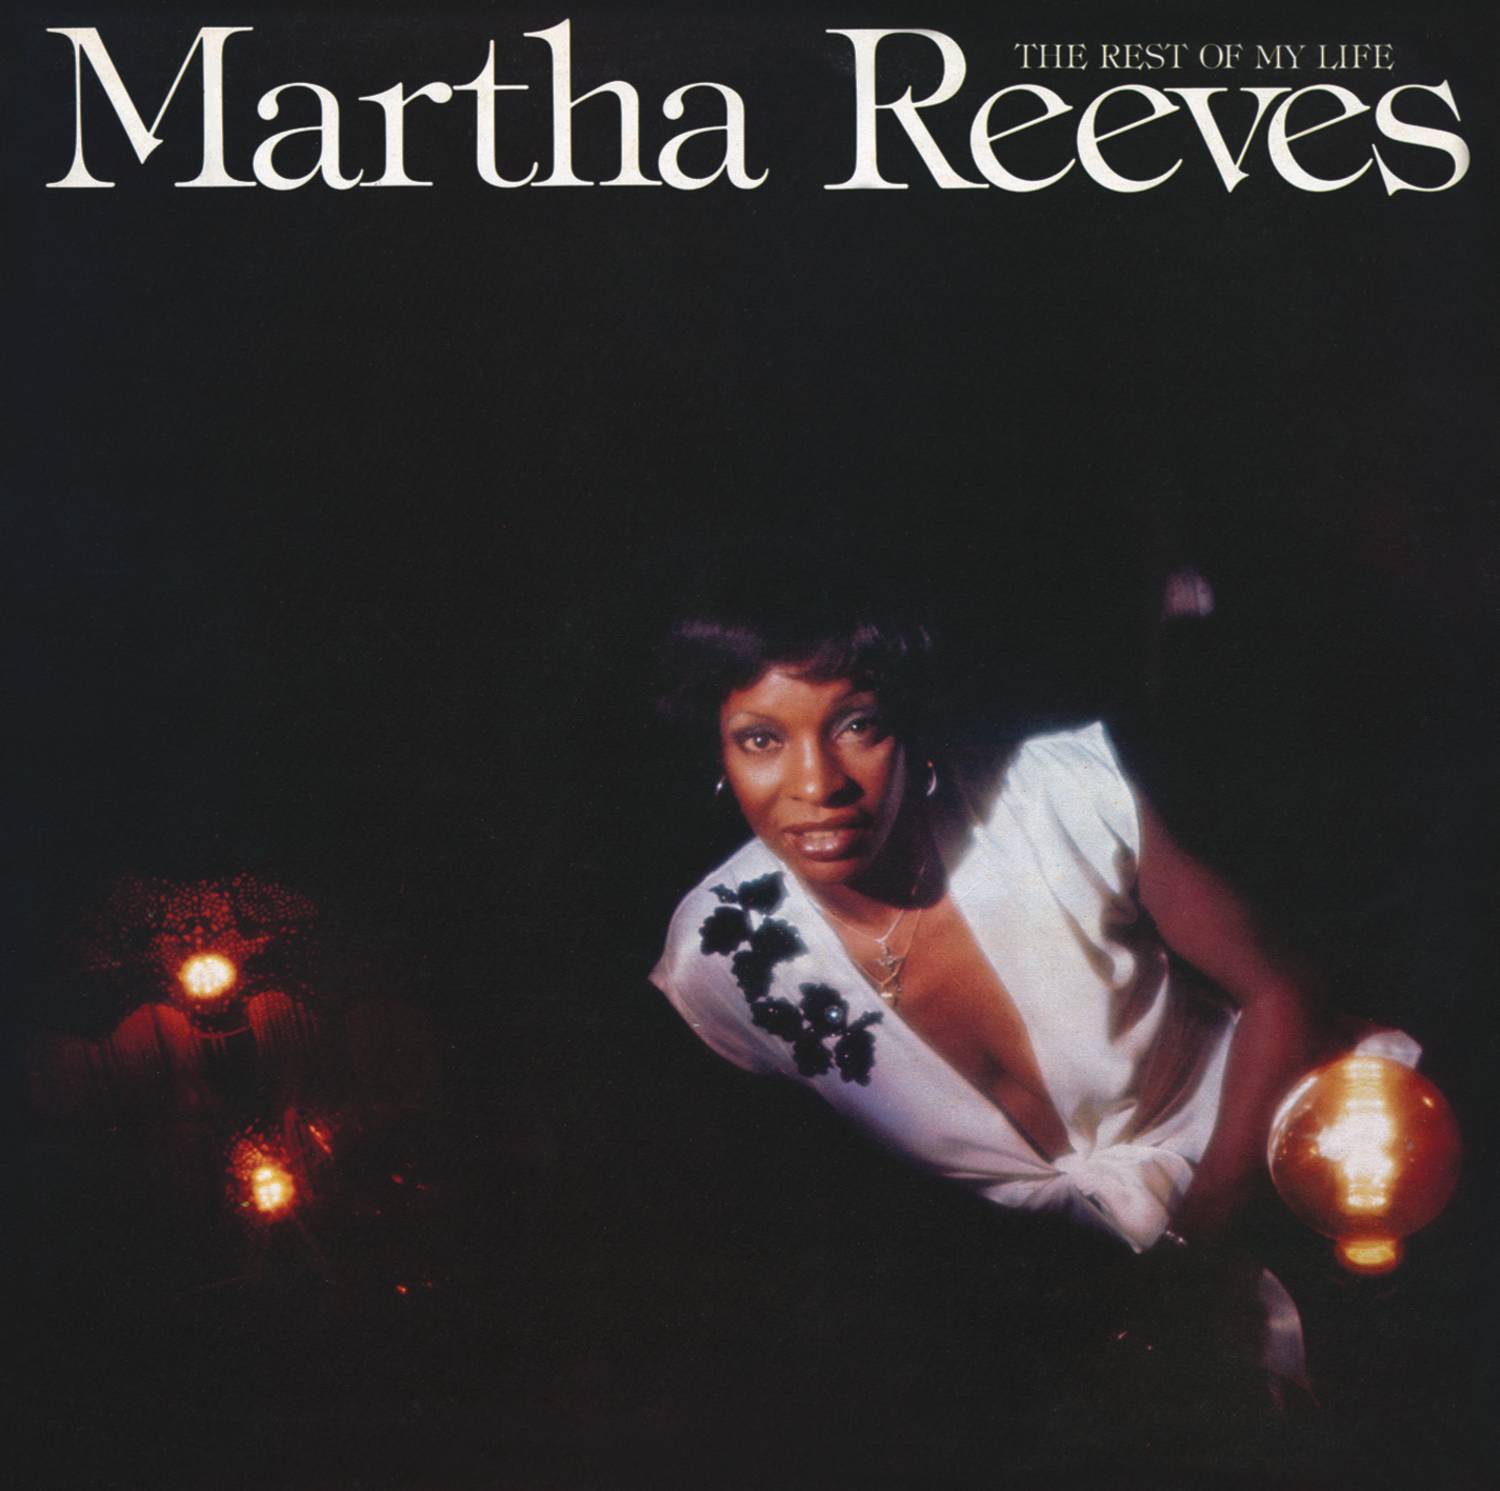 Martha Reeves - The Rest Of My Life {Expanded Edition} (1976/2015) [HDTracks FLAC 24bit/96kHz]